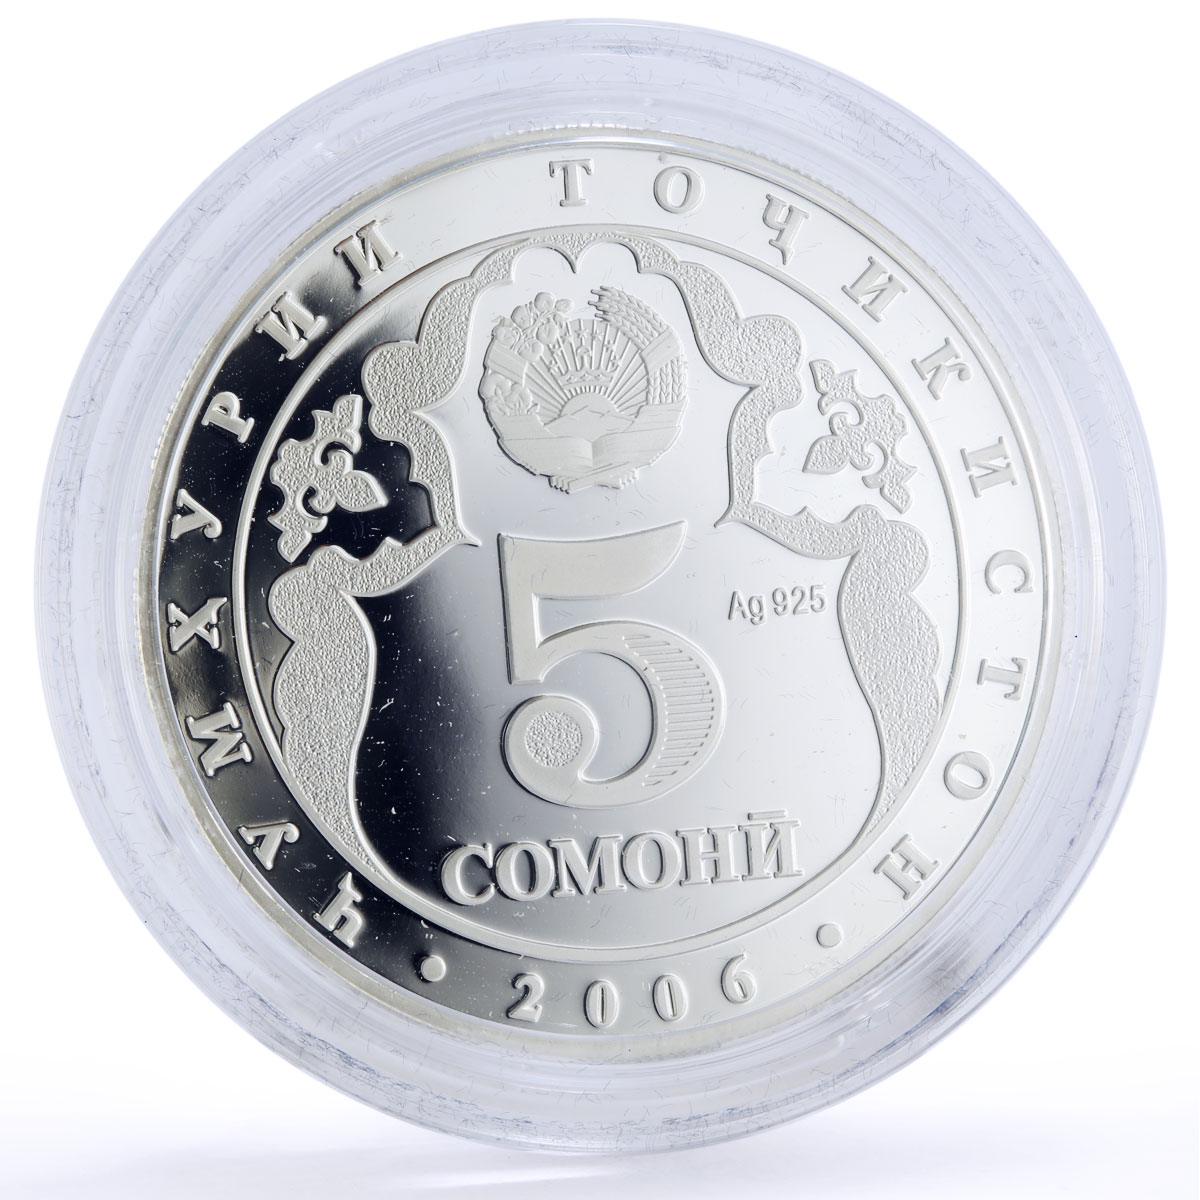 Tajikistan 5 somoni 15th Anniversary of Independence Parliament silver coin 2006